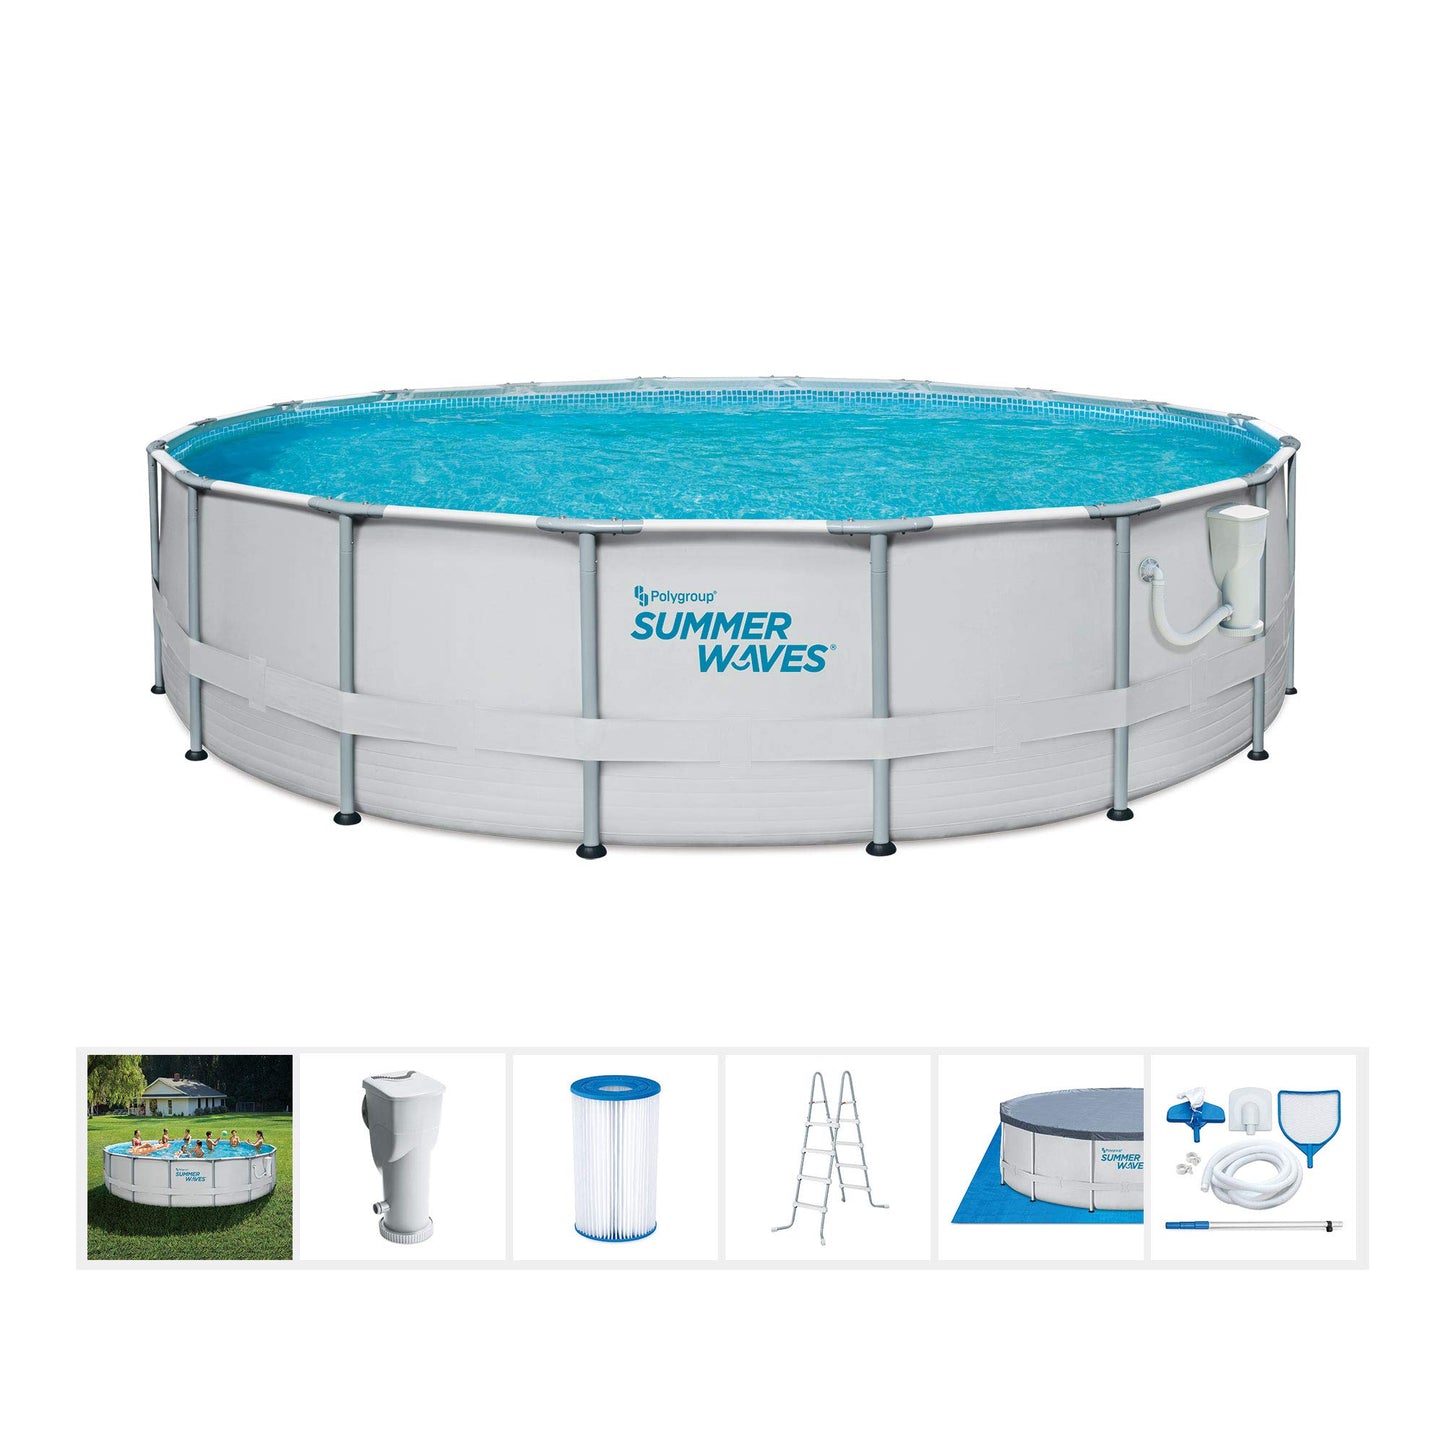 Summer Waves Elite 18ft x 48in Metal Frame Outdoor Backyard Above Ground Pool Set with Filter Pump, Ladder, Ground Cloth, Cover, and Maintenance Kit Grey (W/ Ladder)